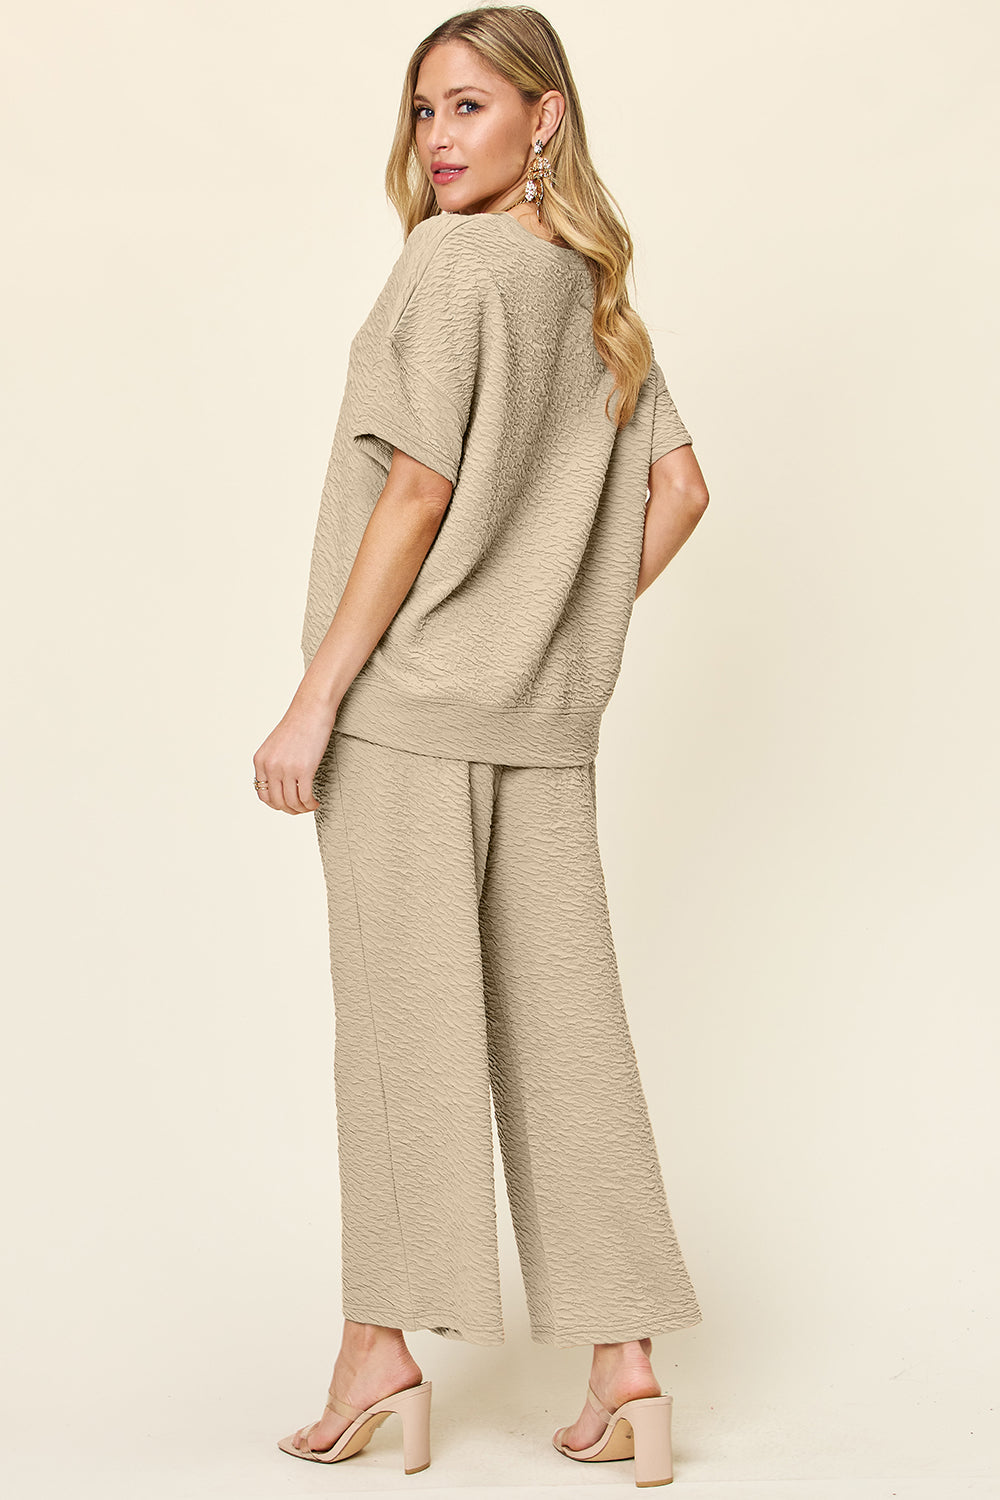 Textured Knit Short Sleeve Top and Pants Set